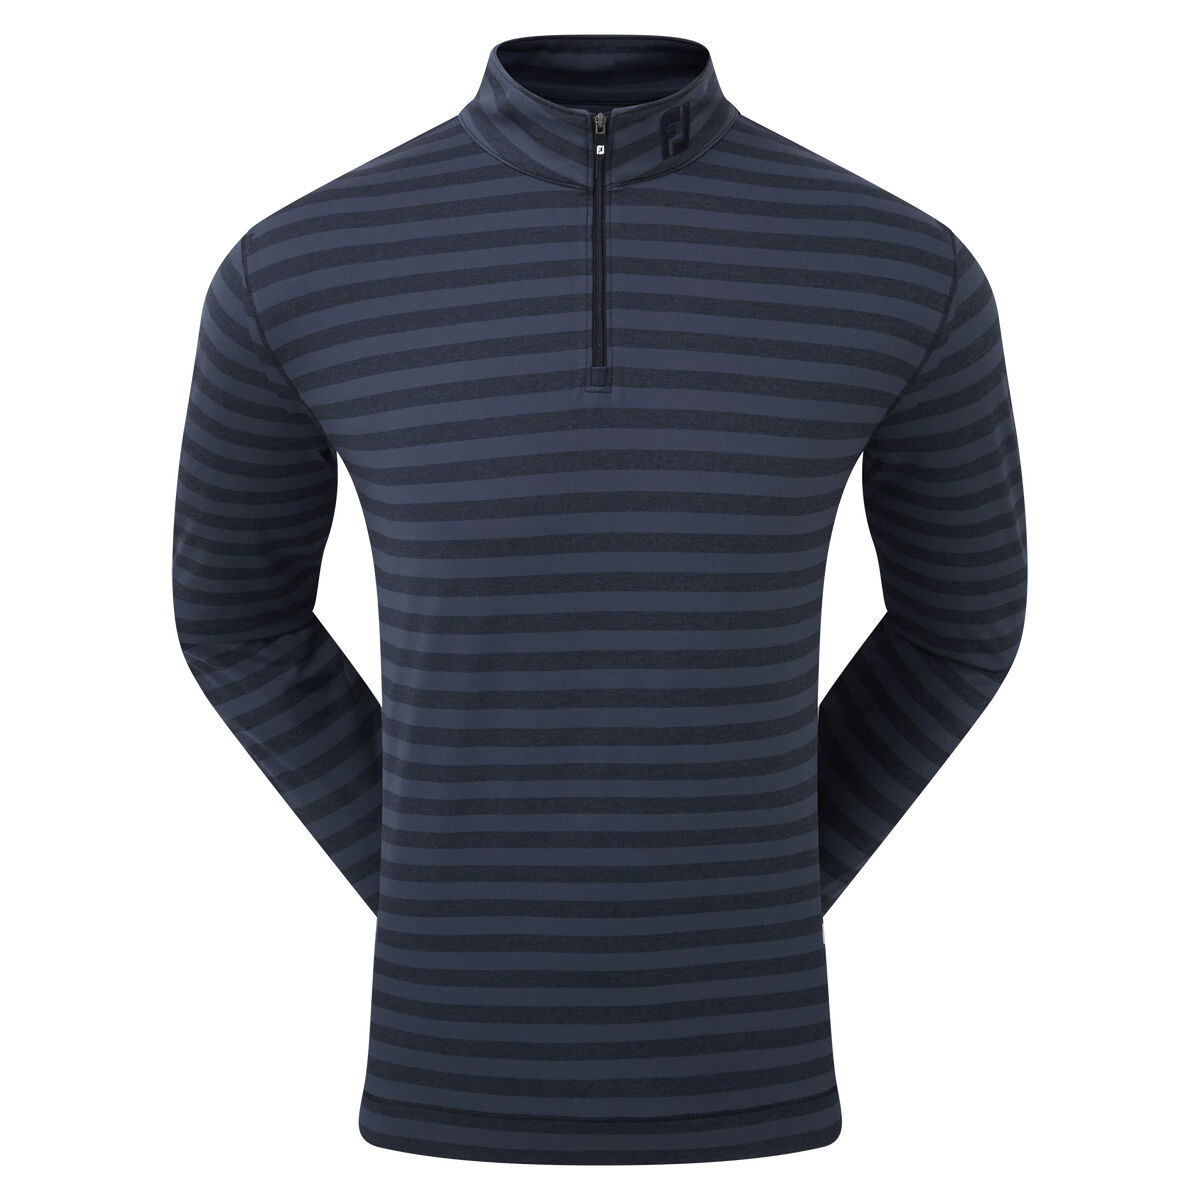 FootJoy Men’s Peached Jersey Tonal Stripe Chill-Out Half Zip Golf Midlayer, Mens, Navy blue, Small | American Golf